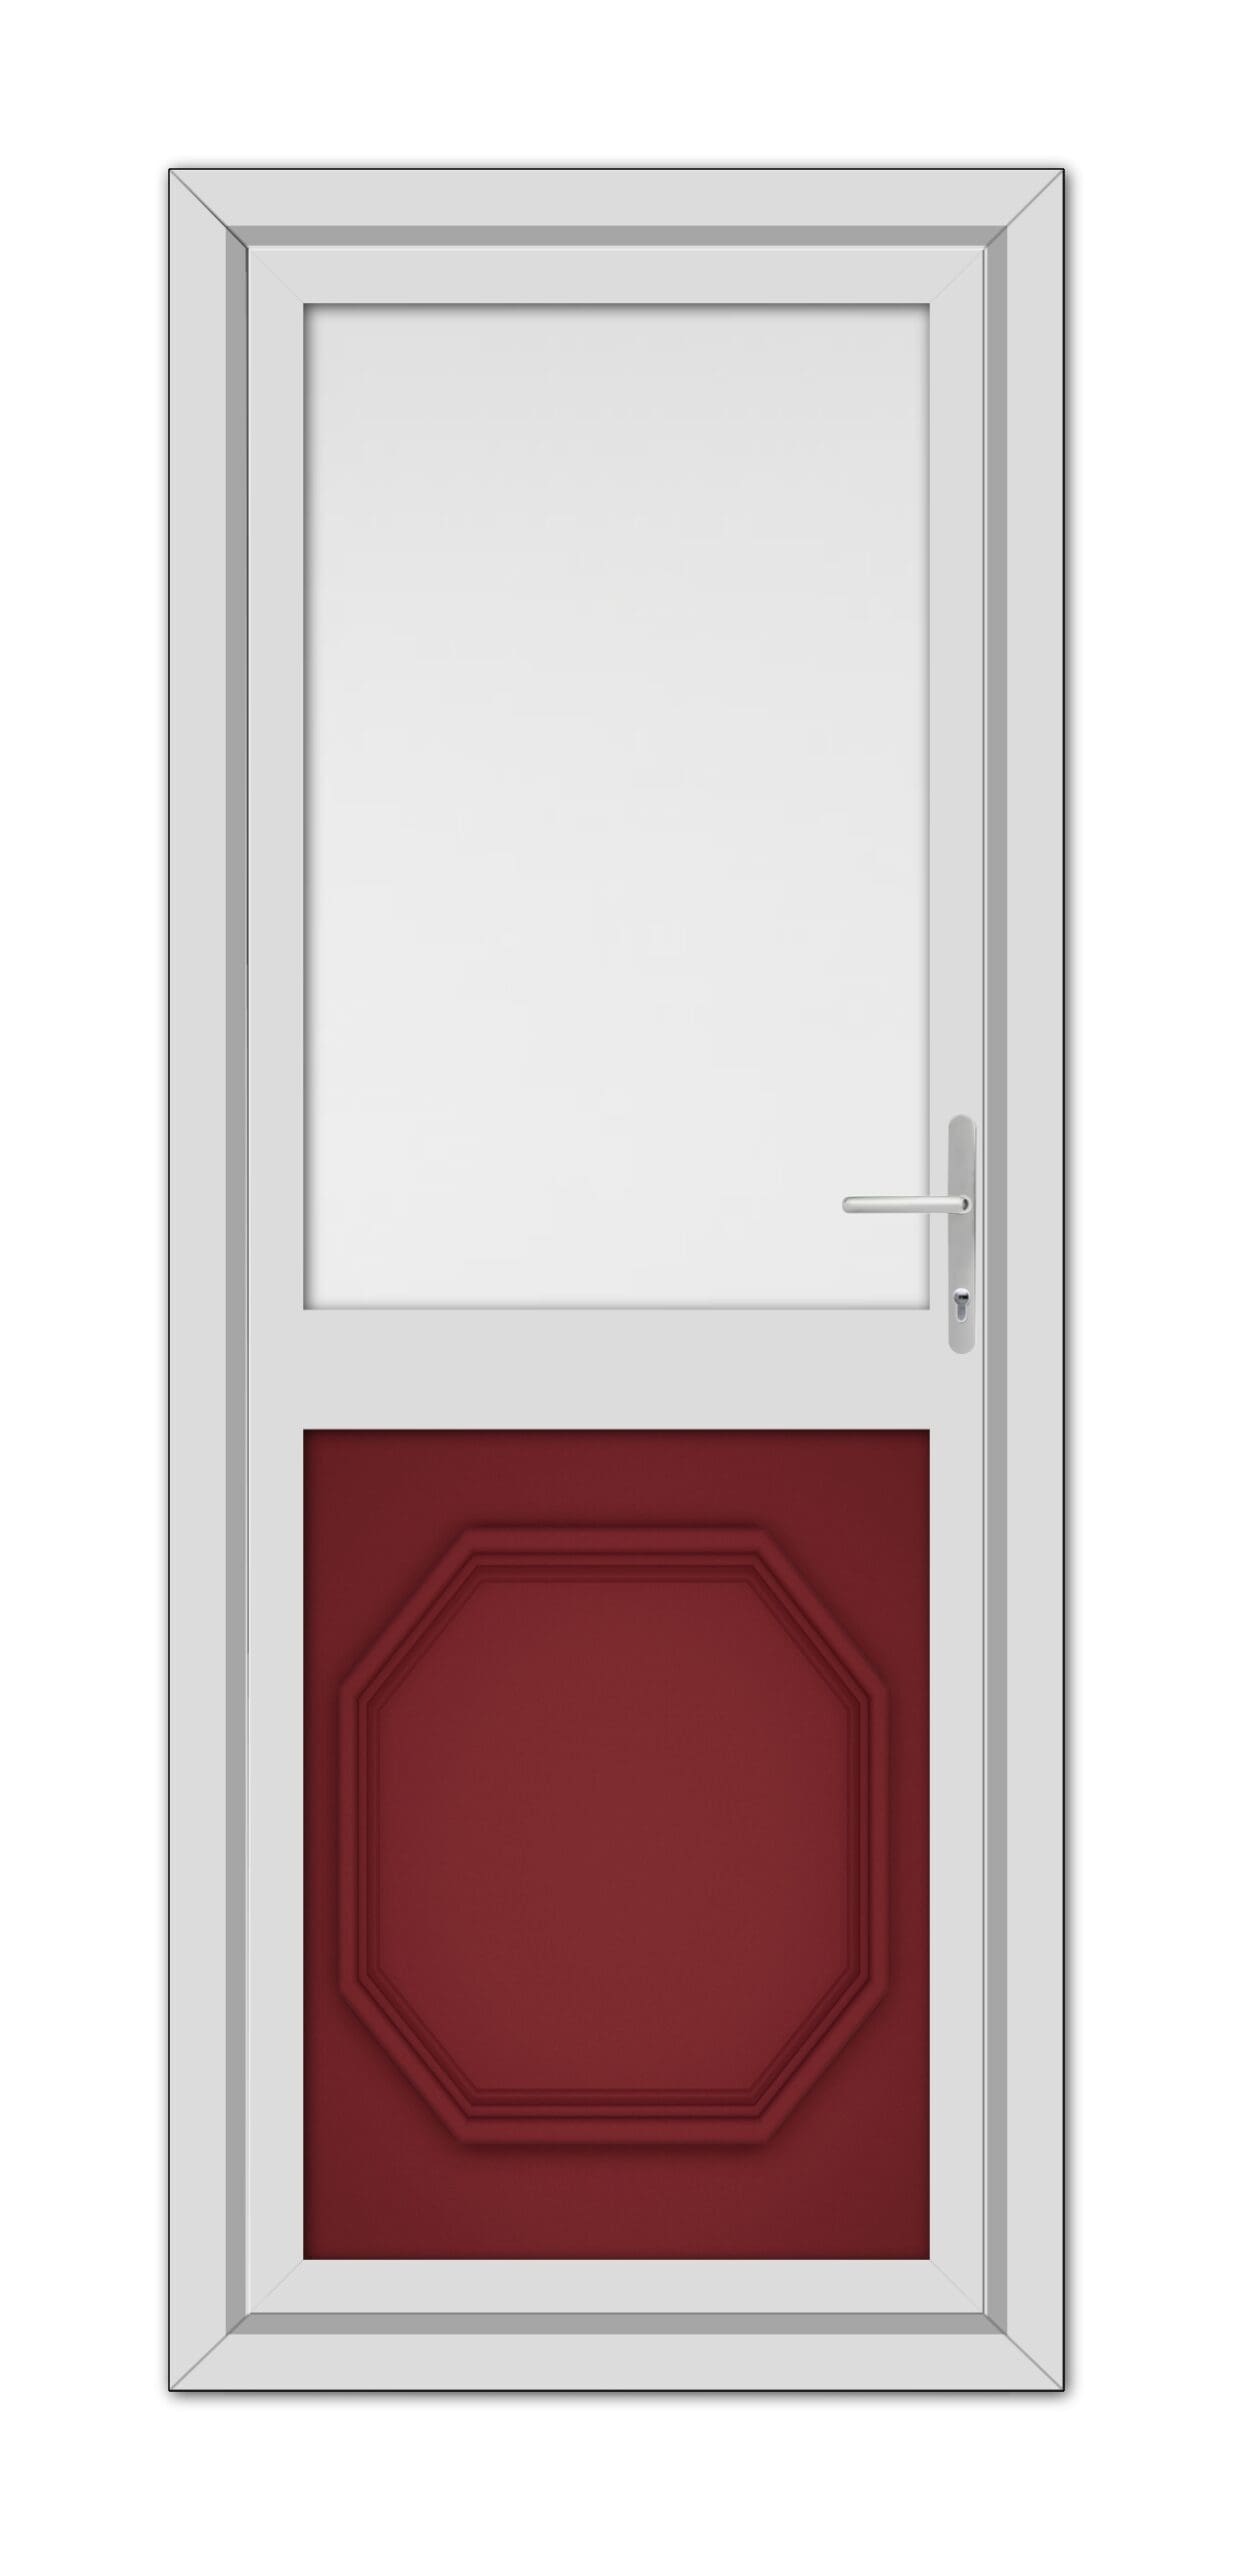 A modern door with a white frame and a Red Buckingham Half uPVC Back Door featuring an octagonal design, plus a small upper window and a handle on the right.